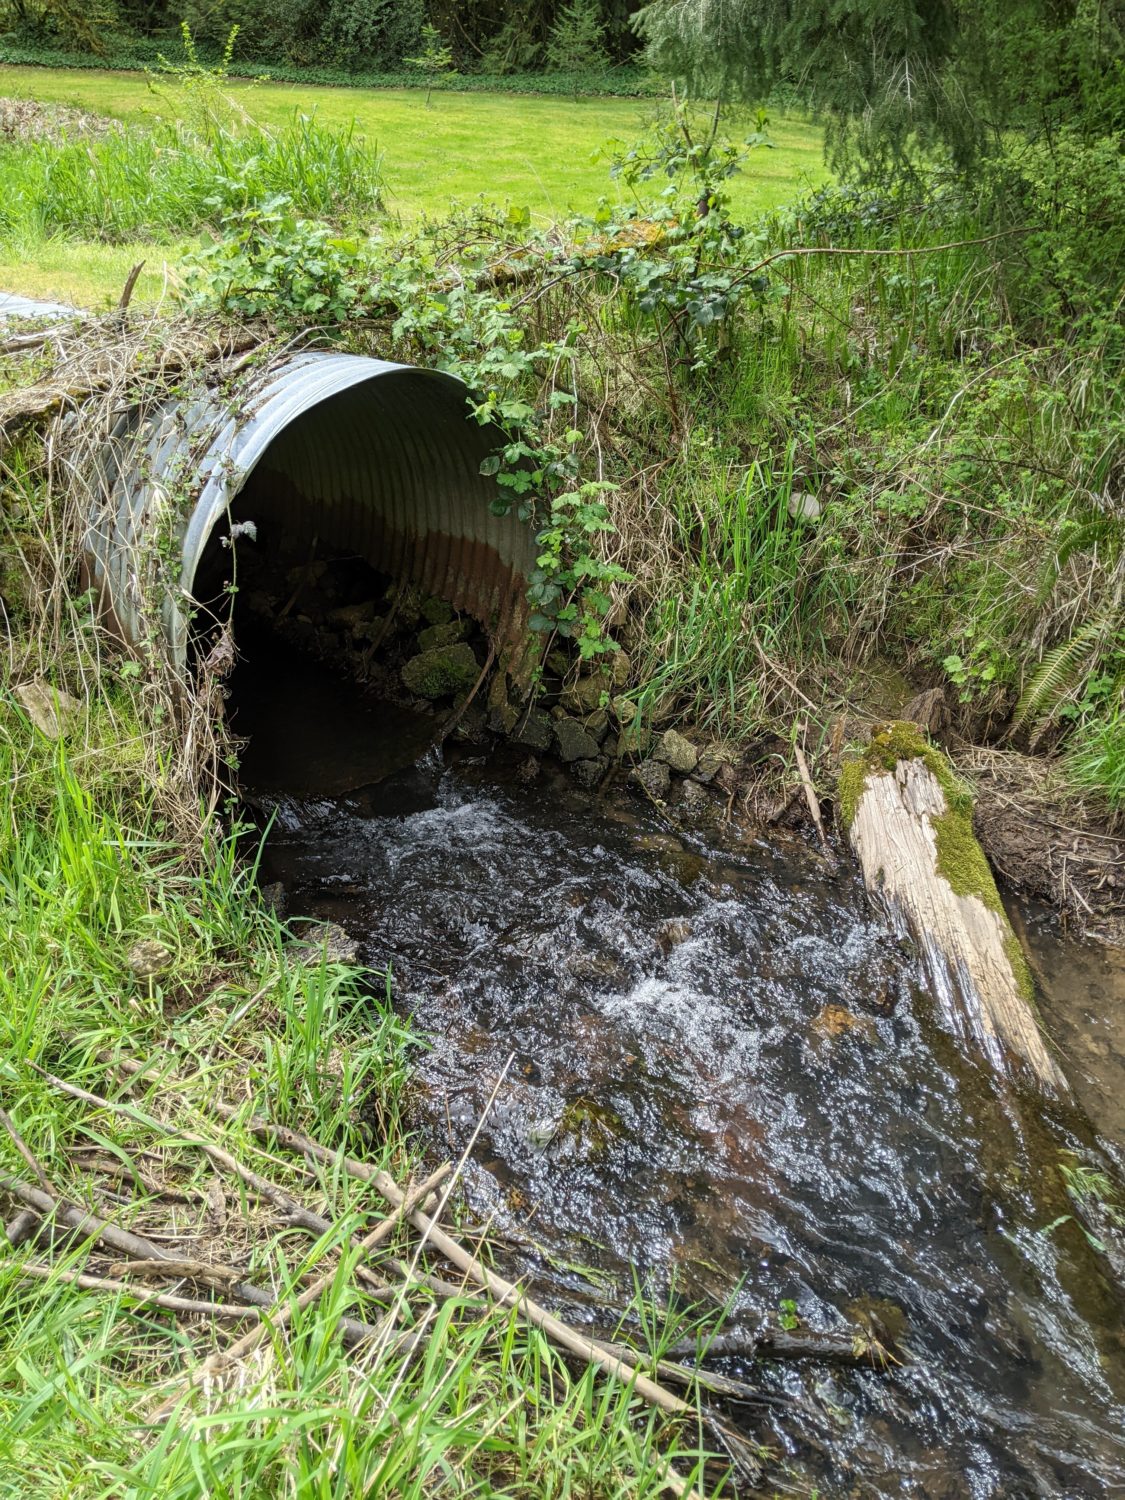 A rusted and exposed old corrugated metal culvert sits perched above the creekbed. There is a log in the stream a few feet downstream of the culvert outlet that angles the flow towards the opposite bank. Behind the stream crossing there is a green mowed field. 